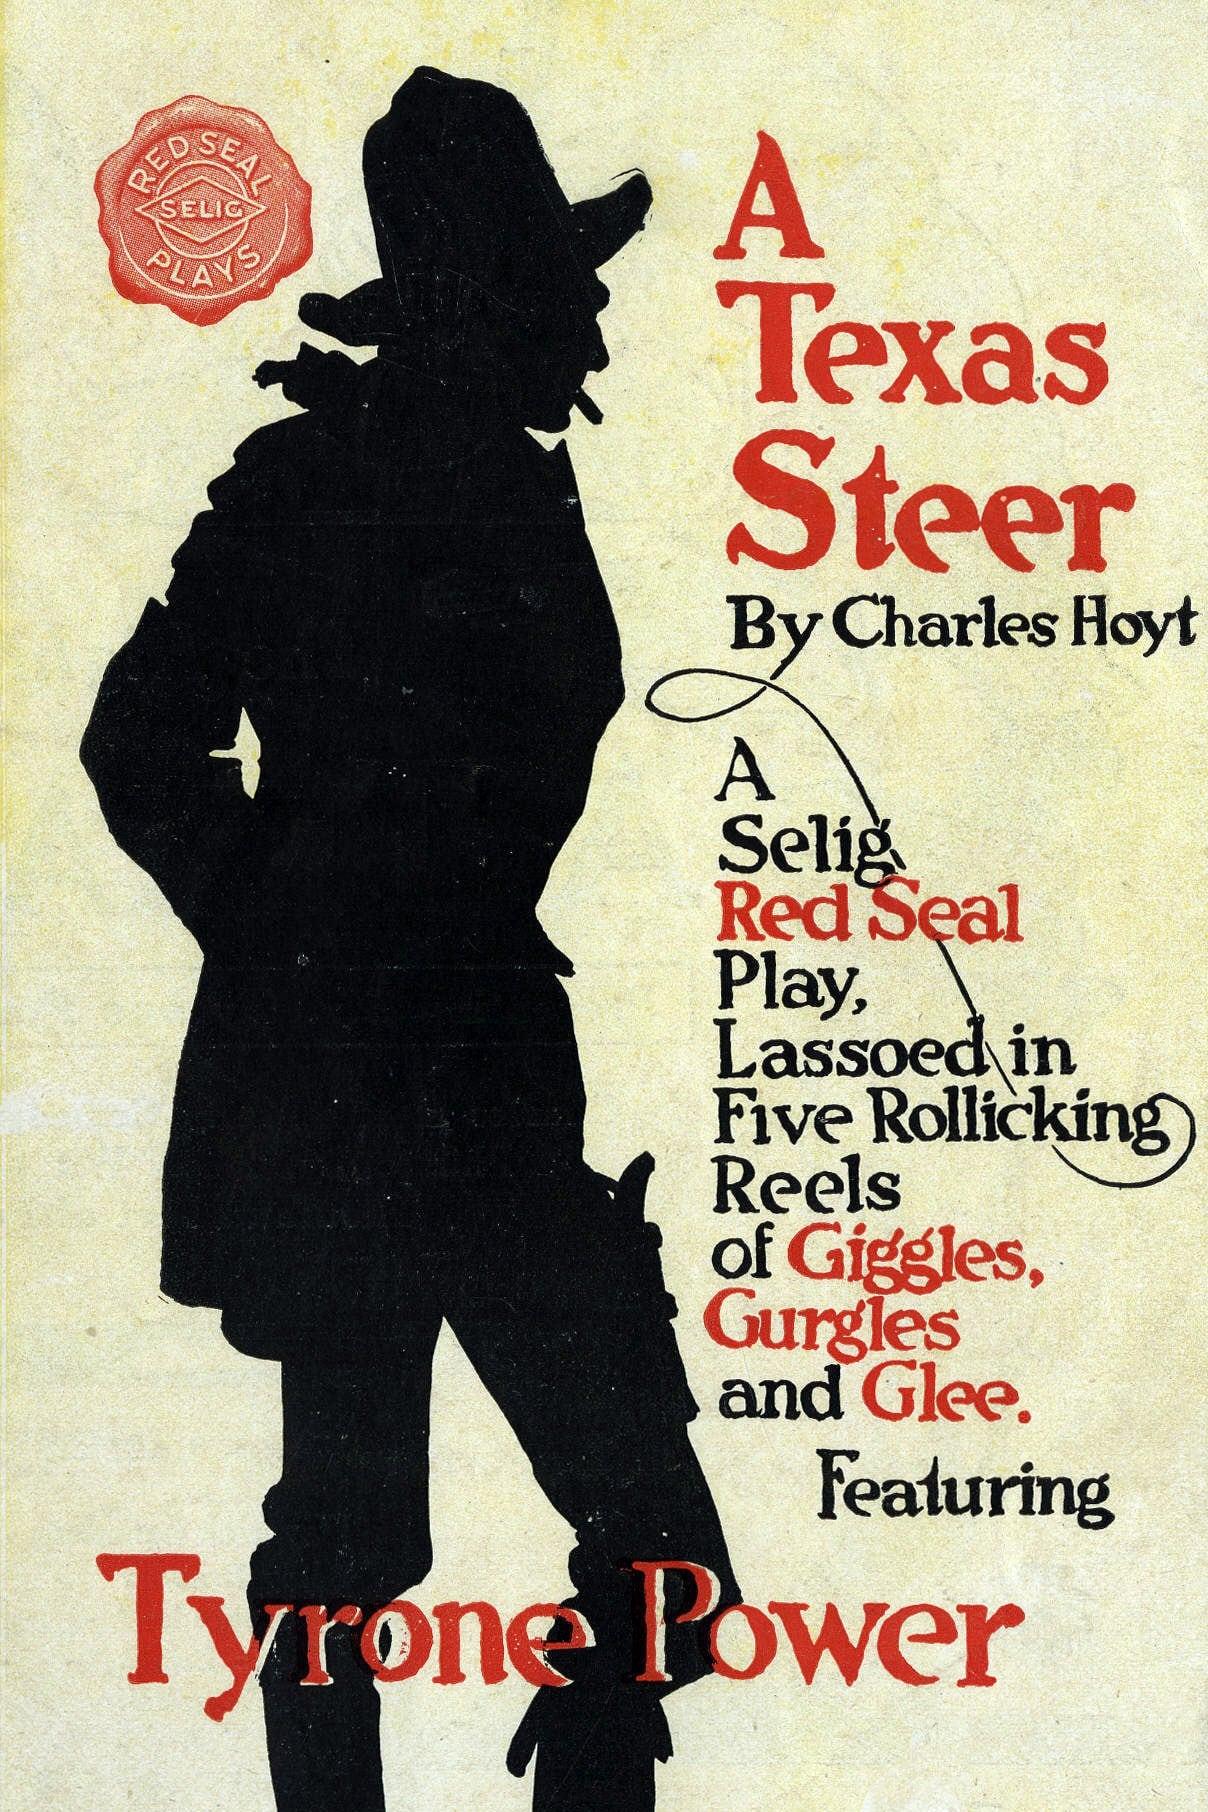 A Texas Steer poster